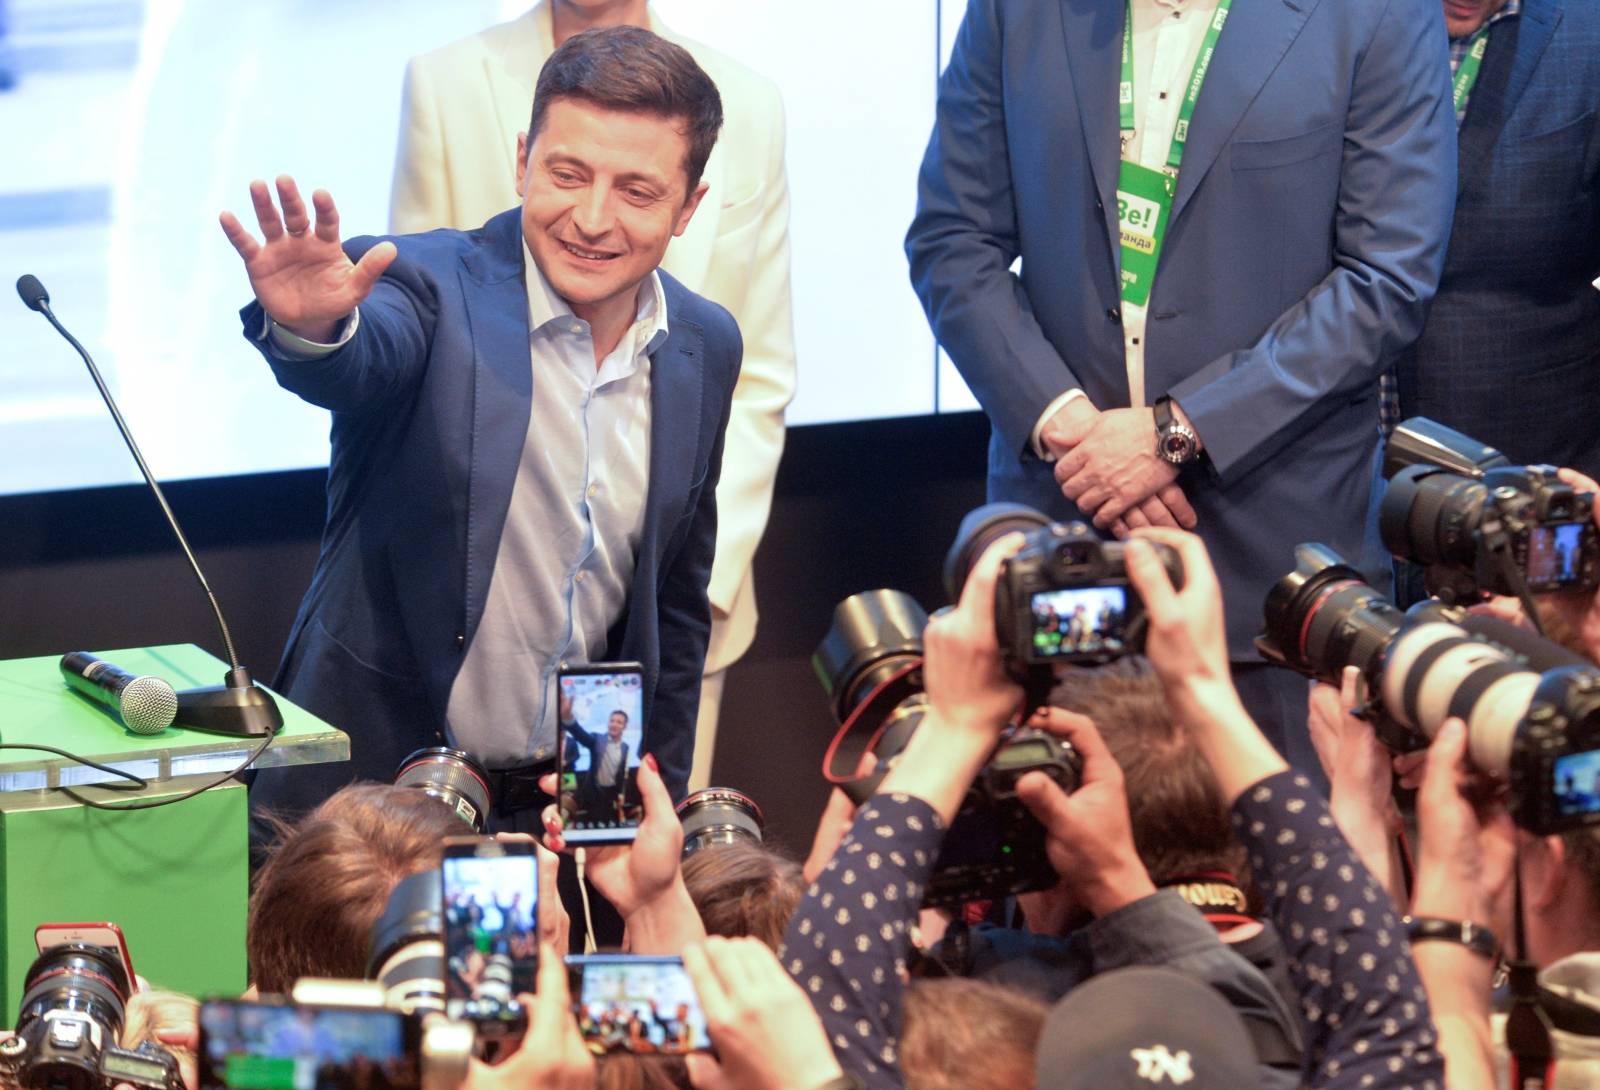 Candidate Zelenskiy reacts following the announcement of an exit poll in Ukraine's presidential election in Kiev